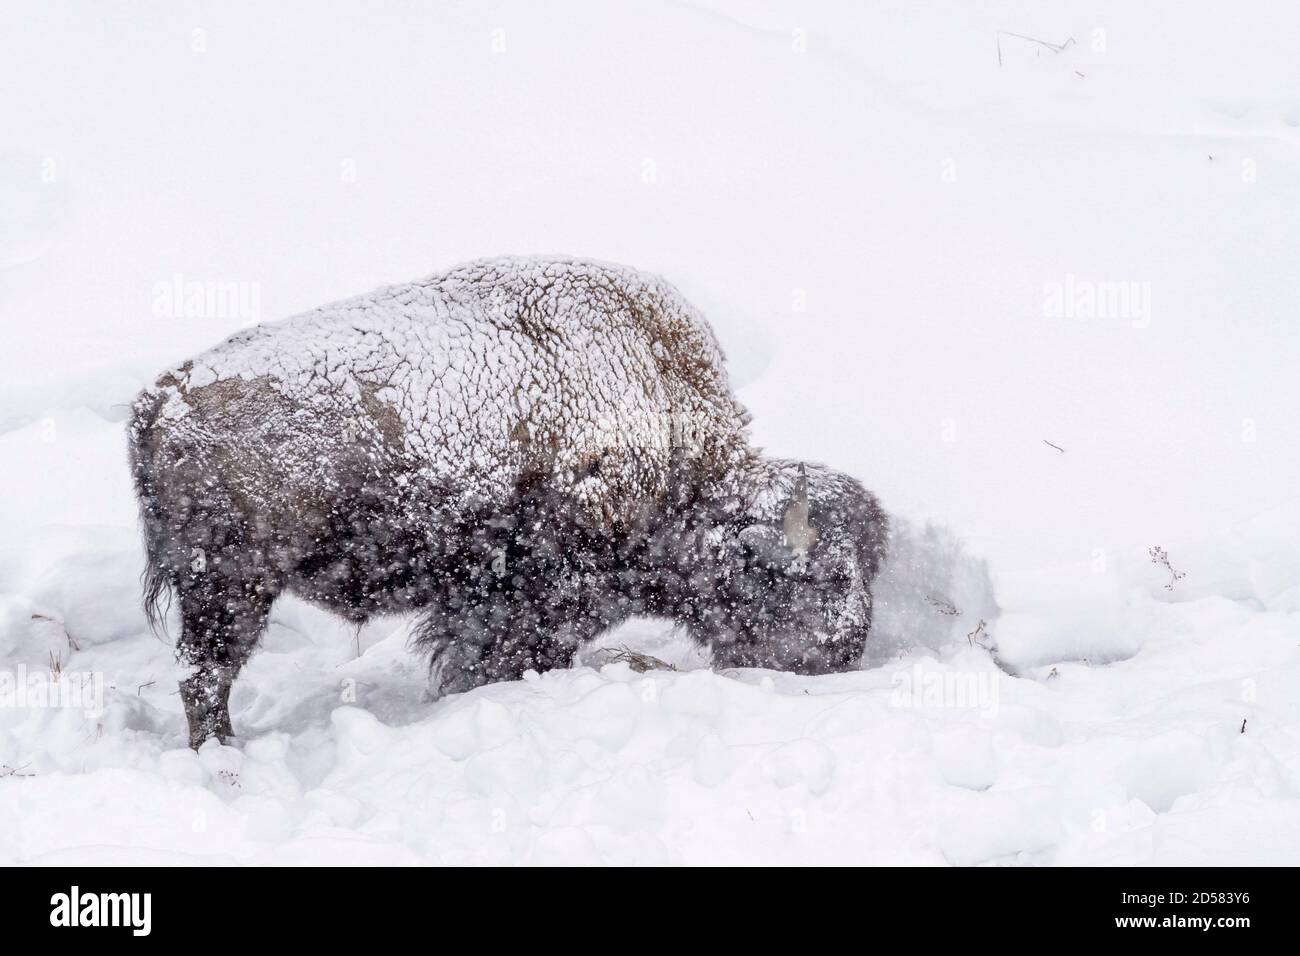 American Bison (Bison bison) typically foraging in deep in snow during blizzard, Yellowstone National Park, Wyoming, United States Stock Photo